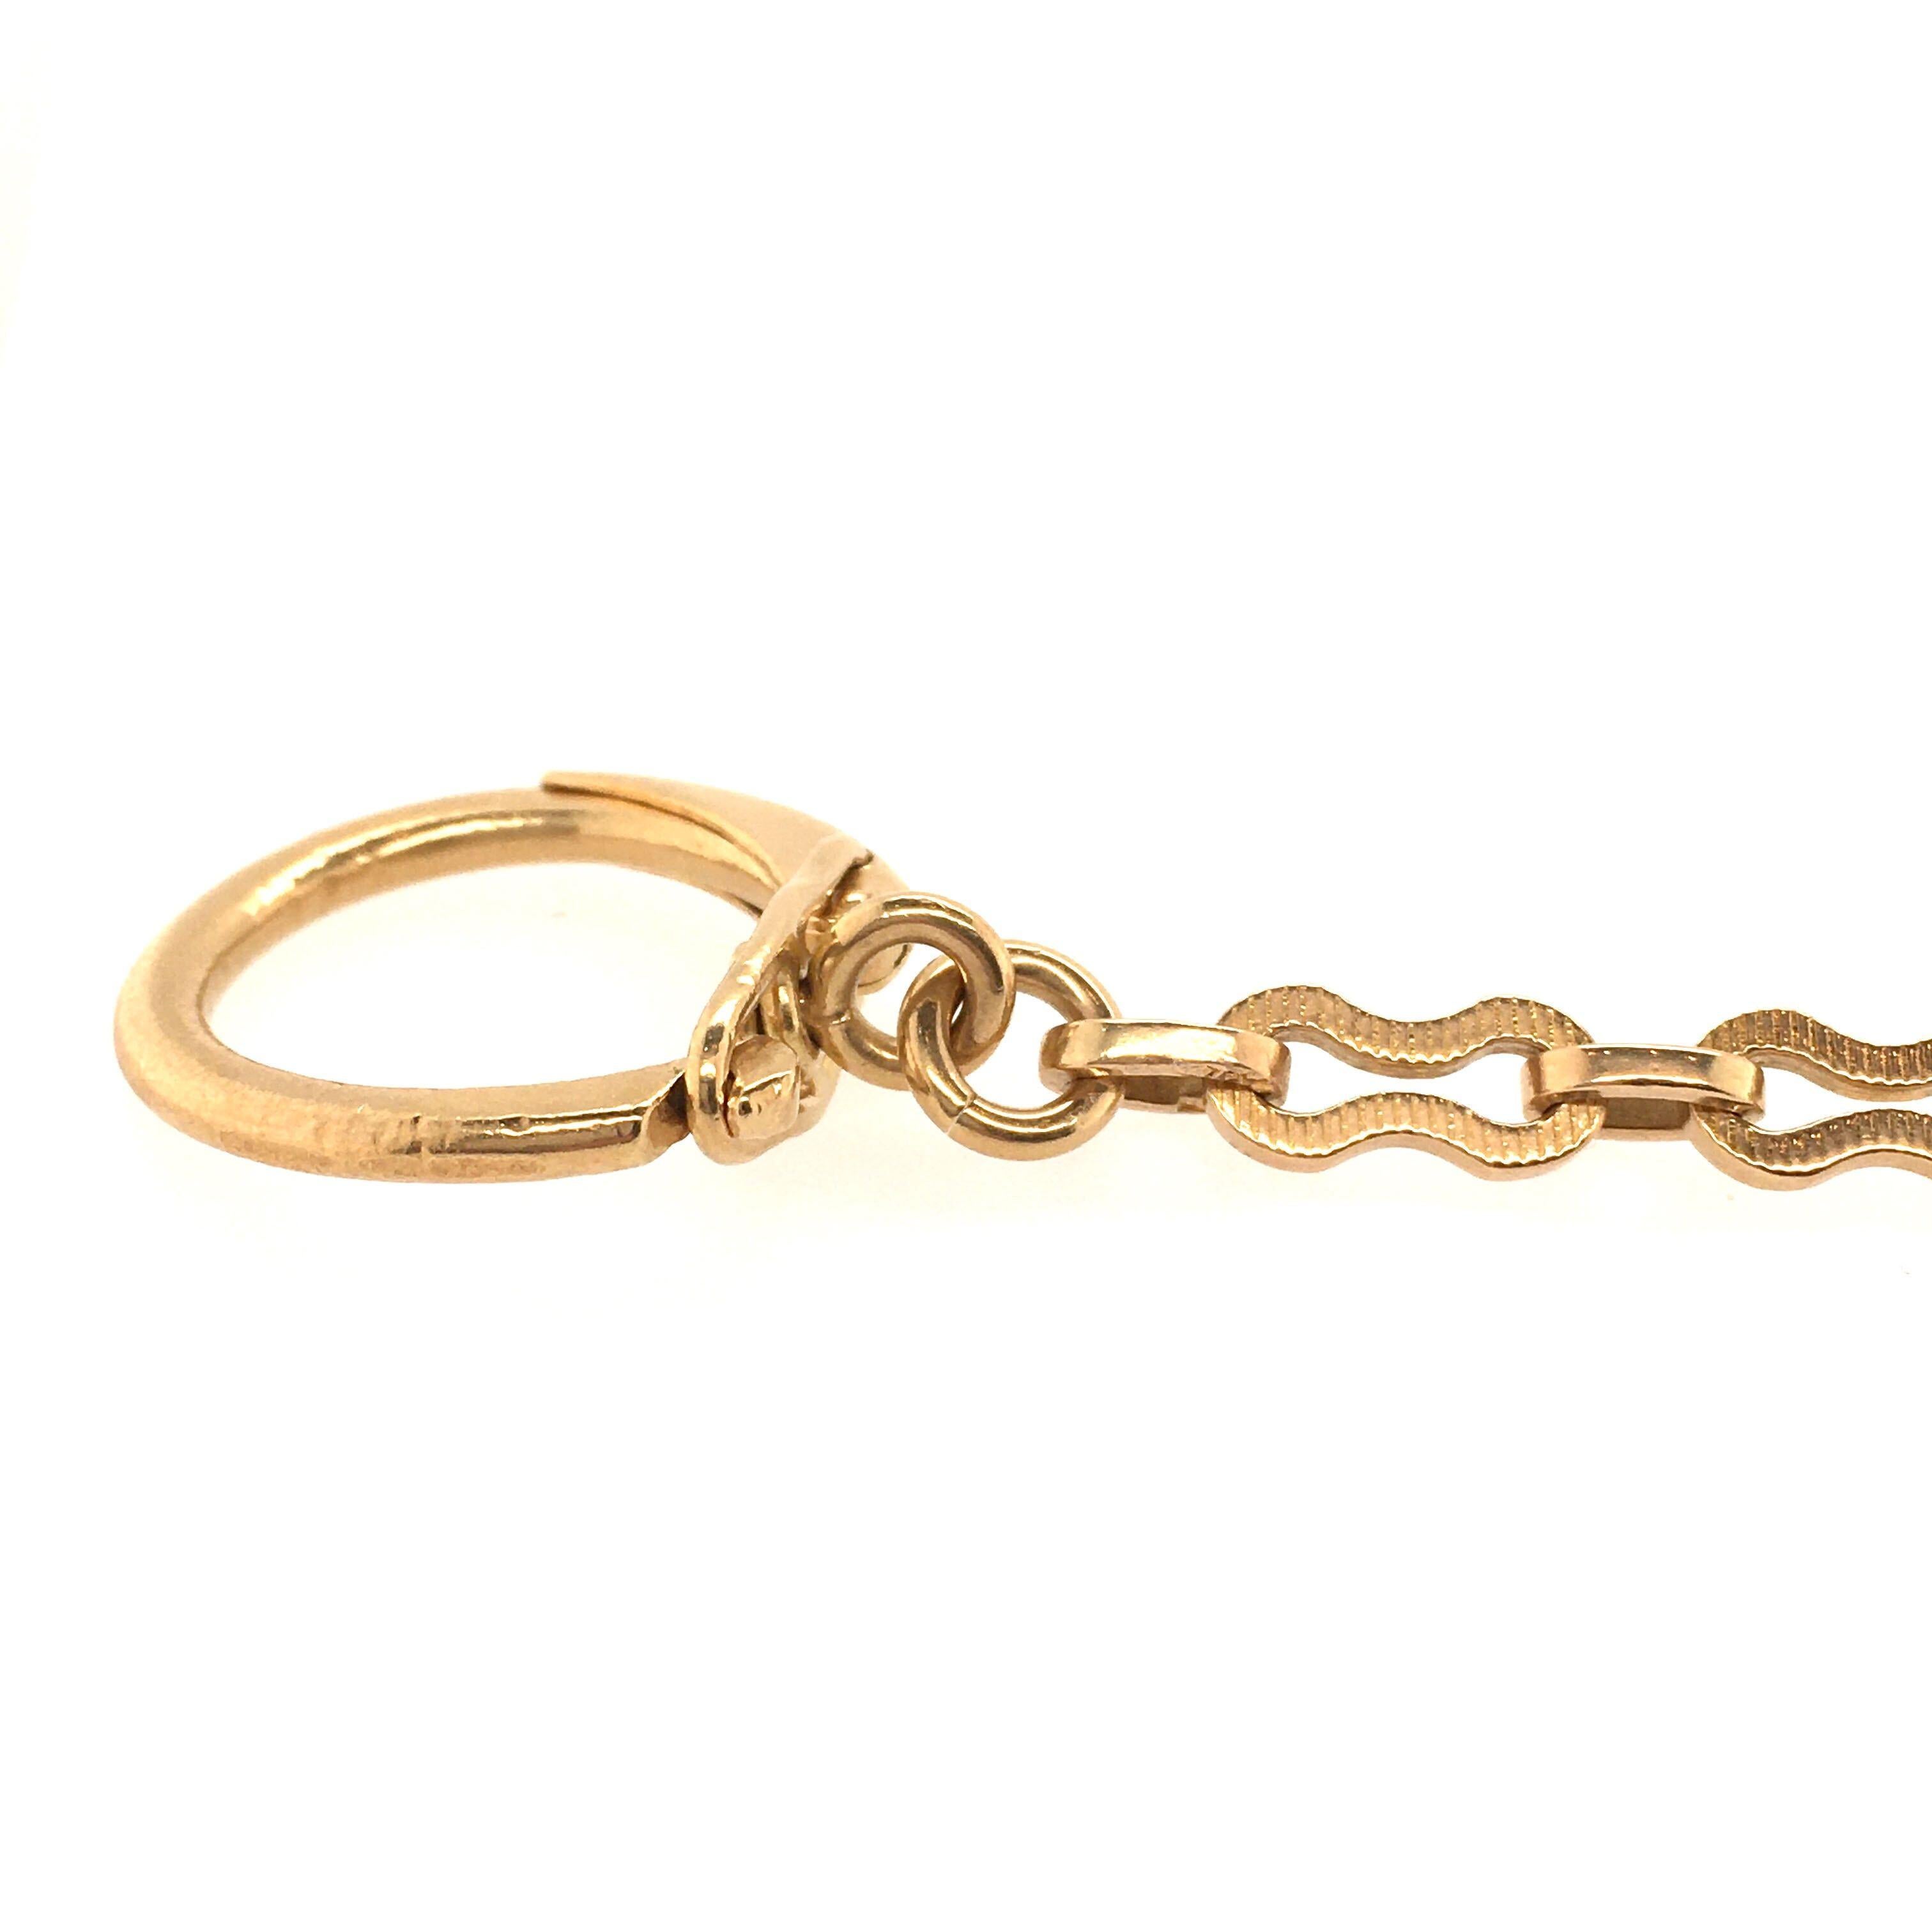 An 18 and 14 karat yellow gold key chain. Suspending a disc depicting The Mouth of Truth, from a fancy link chain. Diameter of disc is approximately 1 inch, length is approximately 4 1/2 inches, gross weight is approximately 21.8 grams. 